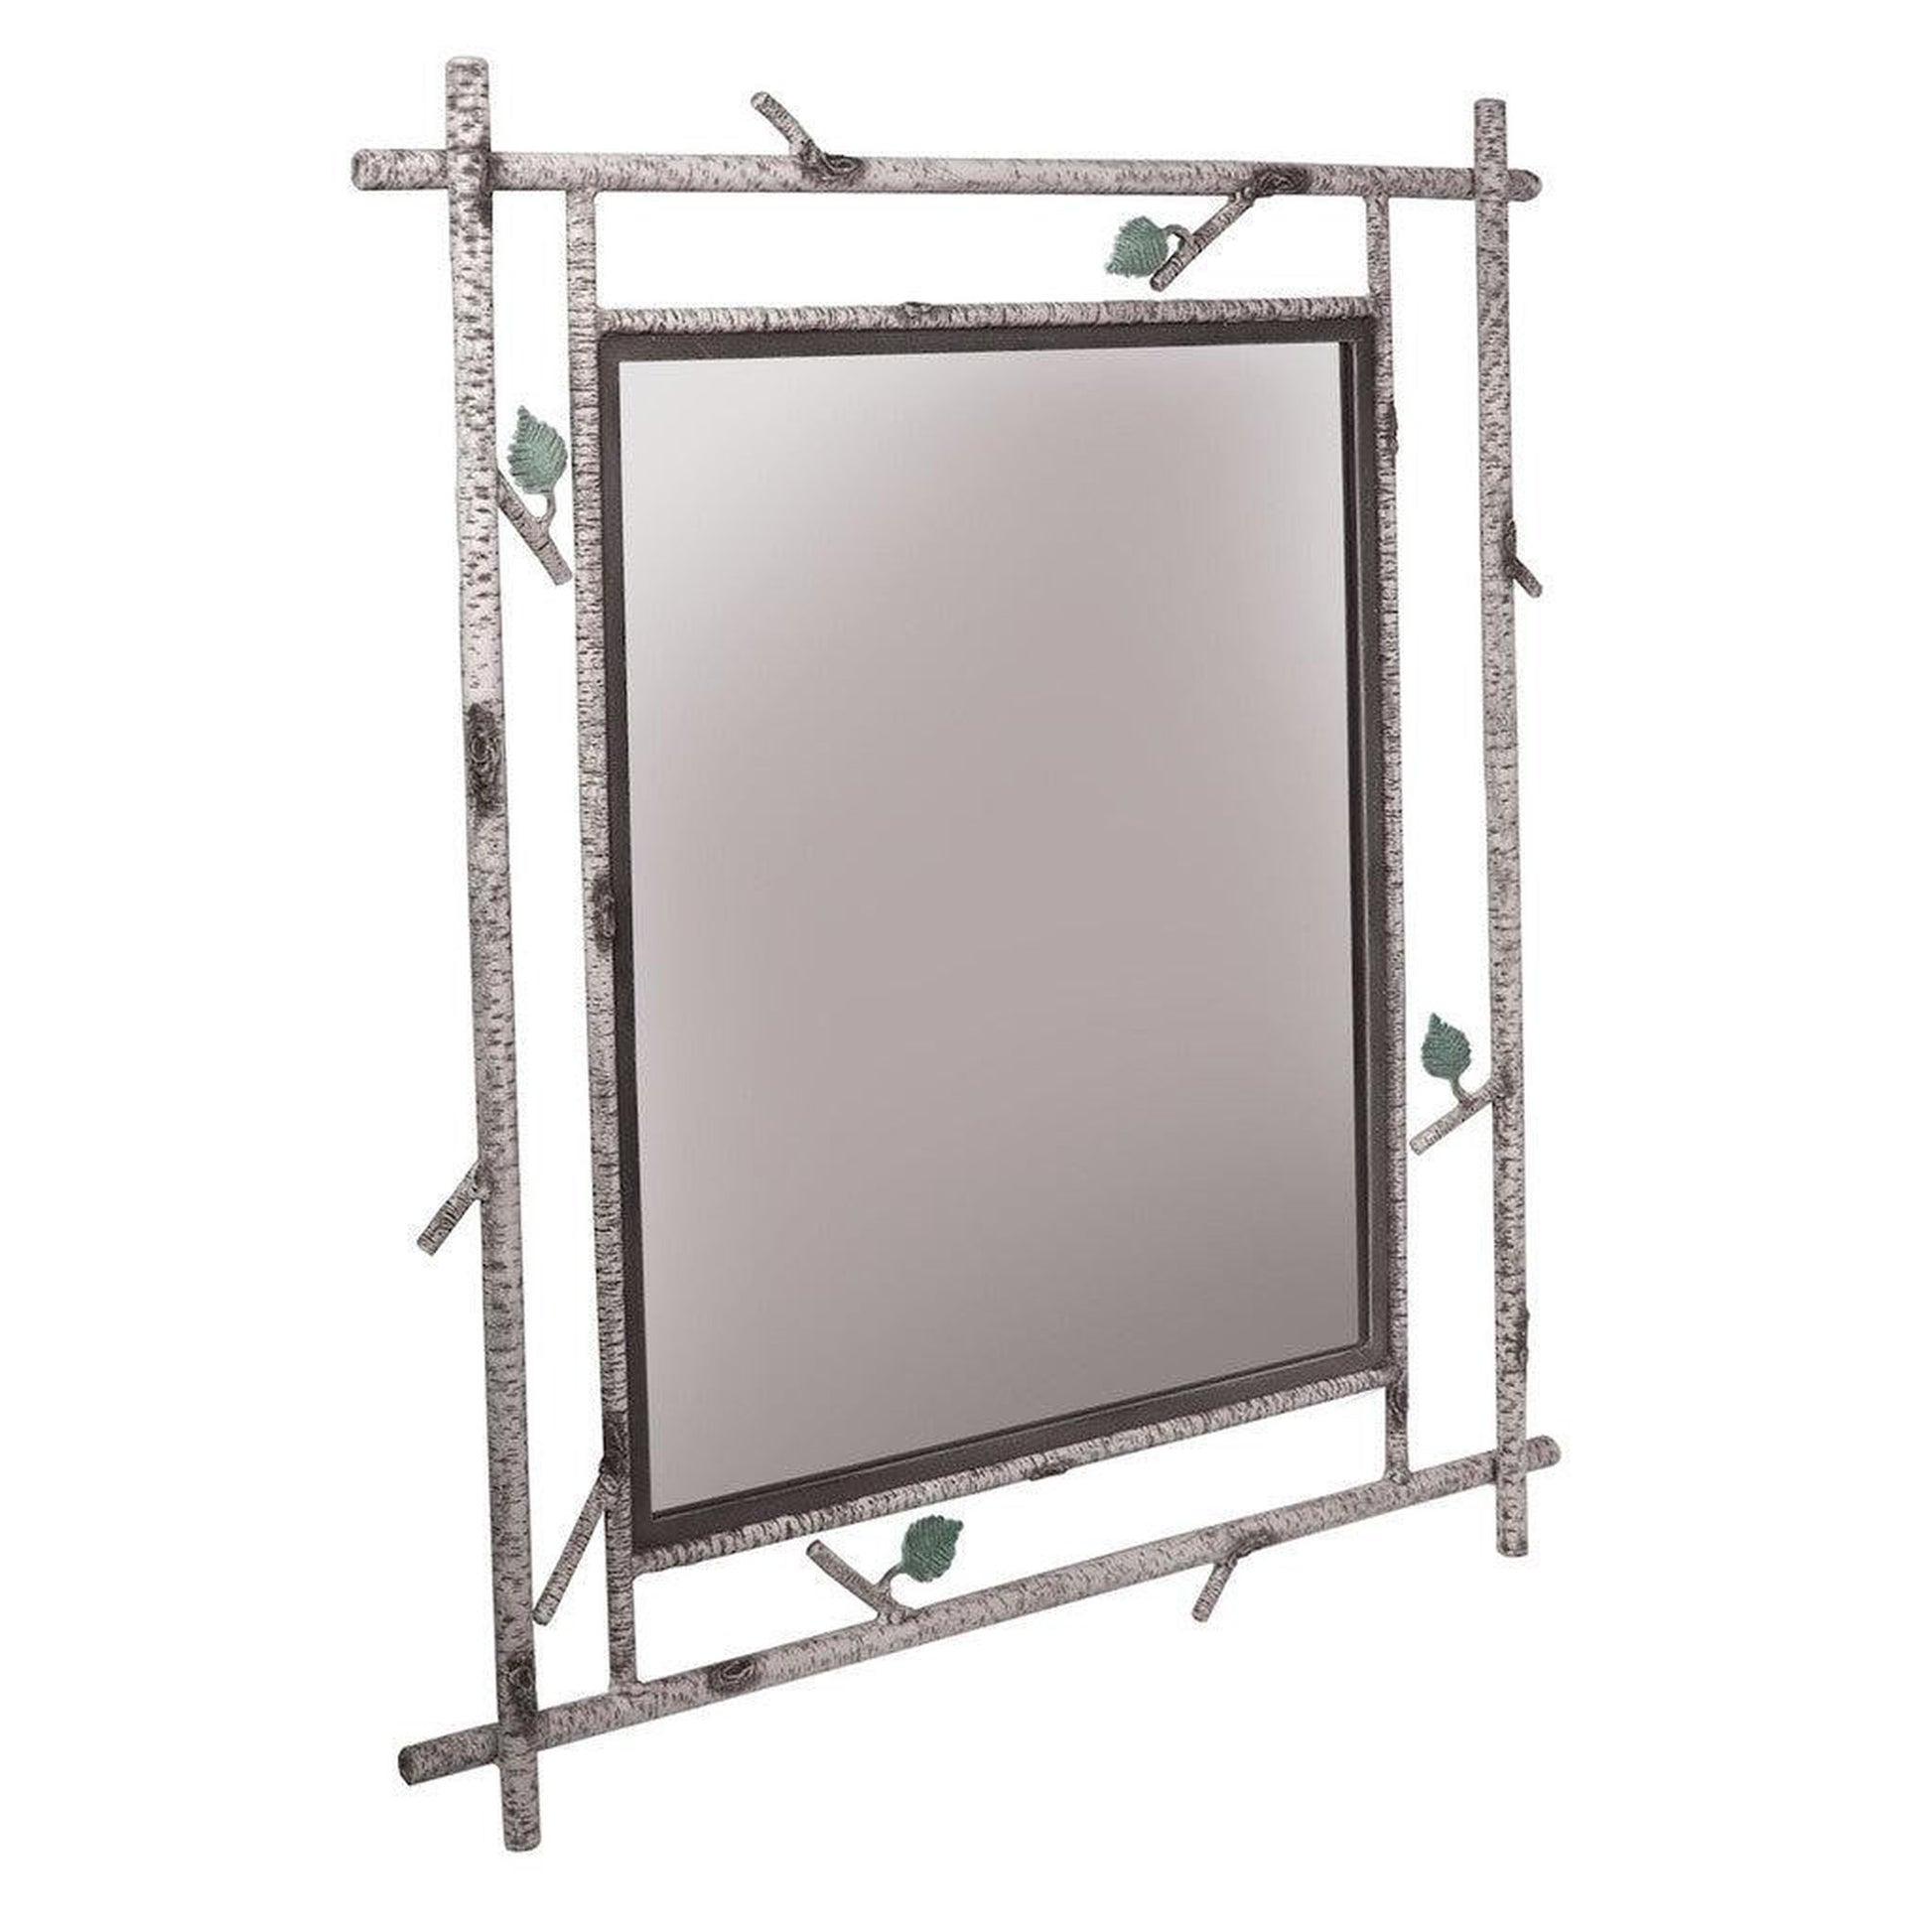 Stone County Ironworks Whisper Creek 35" x 47" Large Hand Rubbed Rust Iron Wall Mirror With Copper Iron Accent